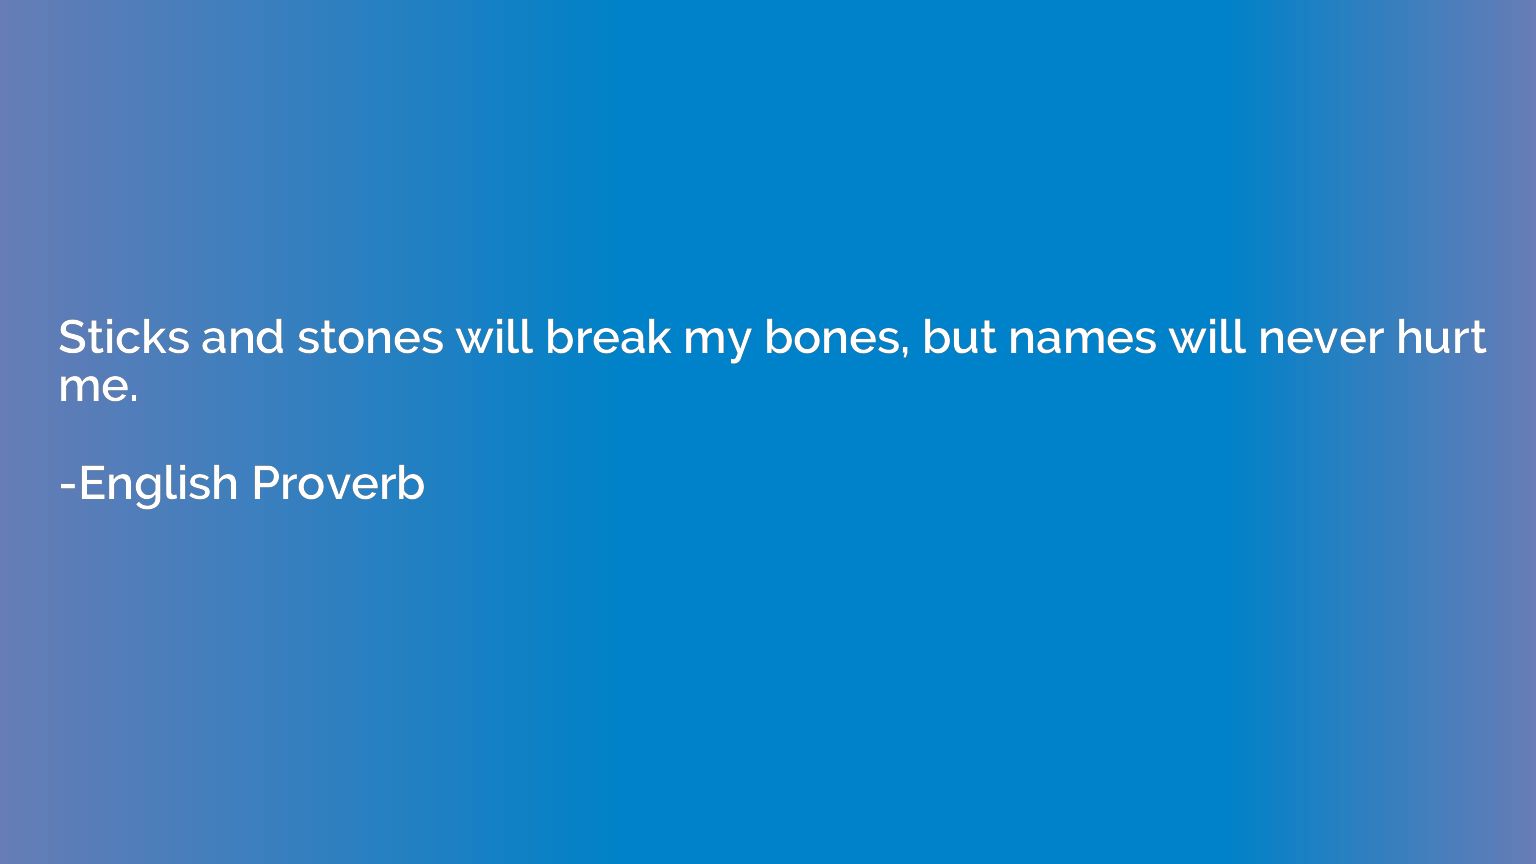 Sticks and stones will break my bones, but names will never 